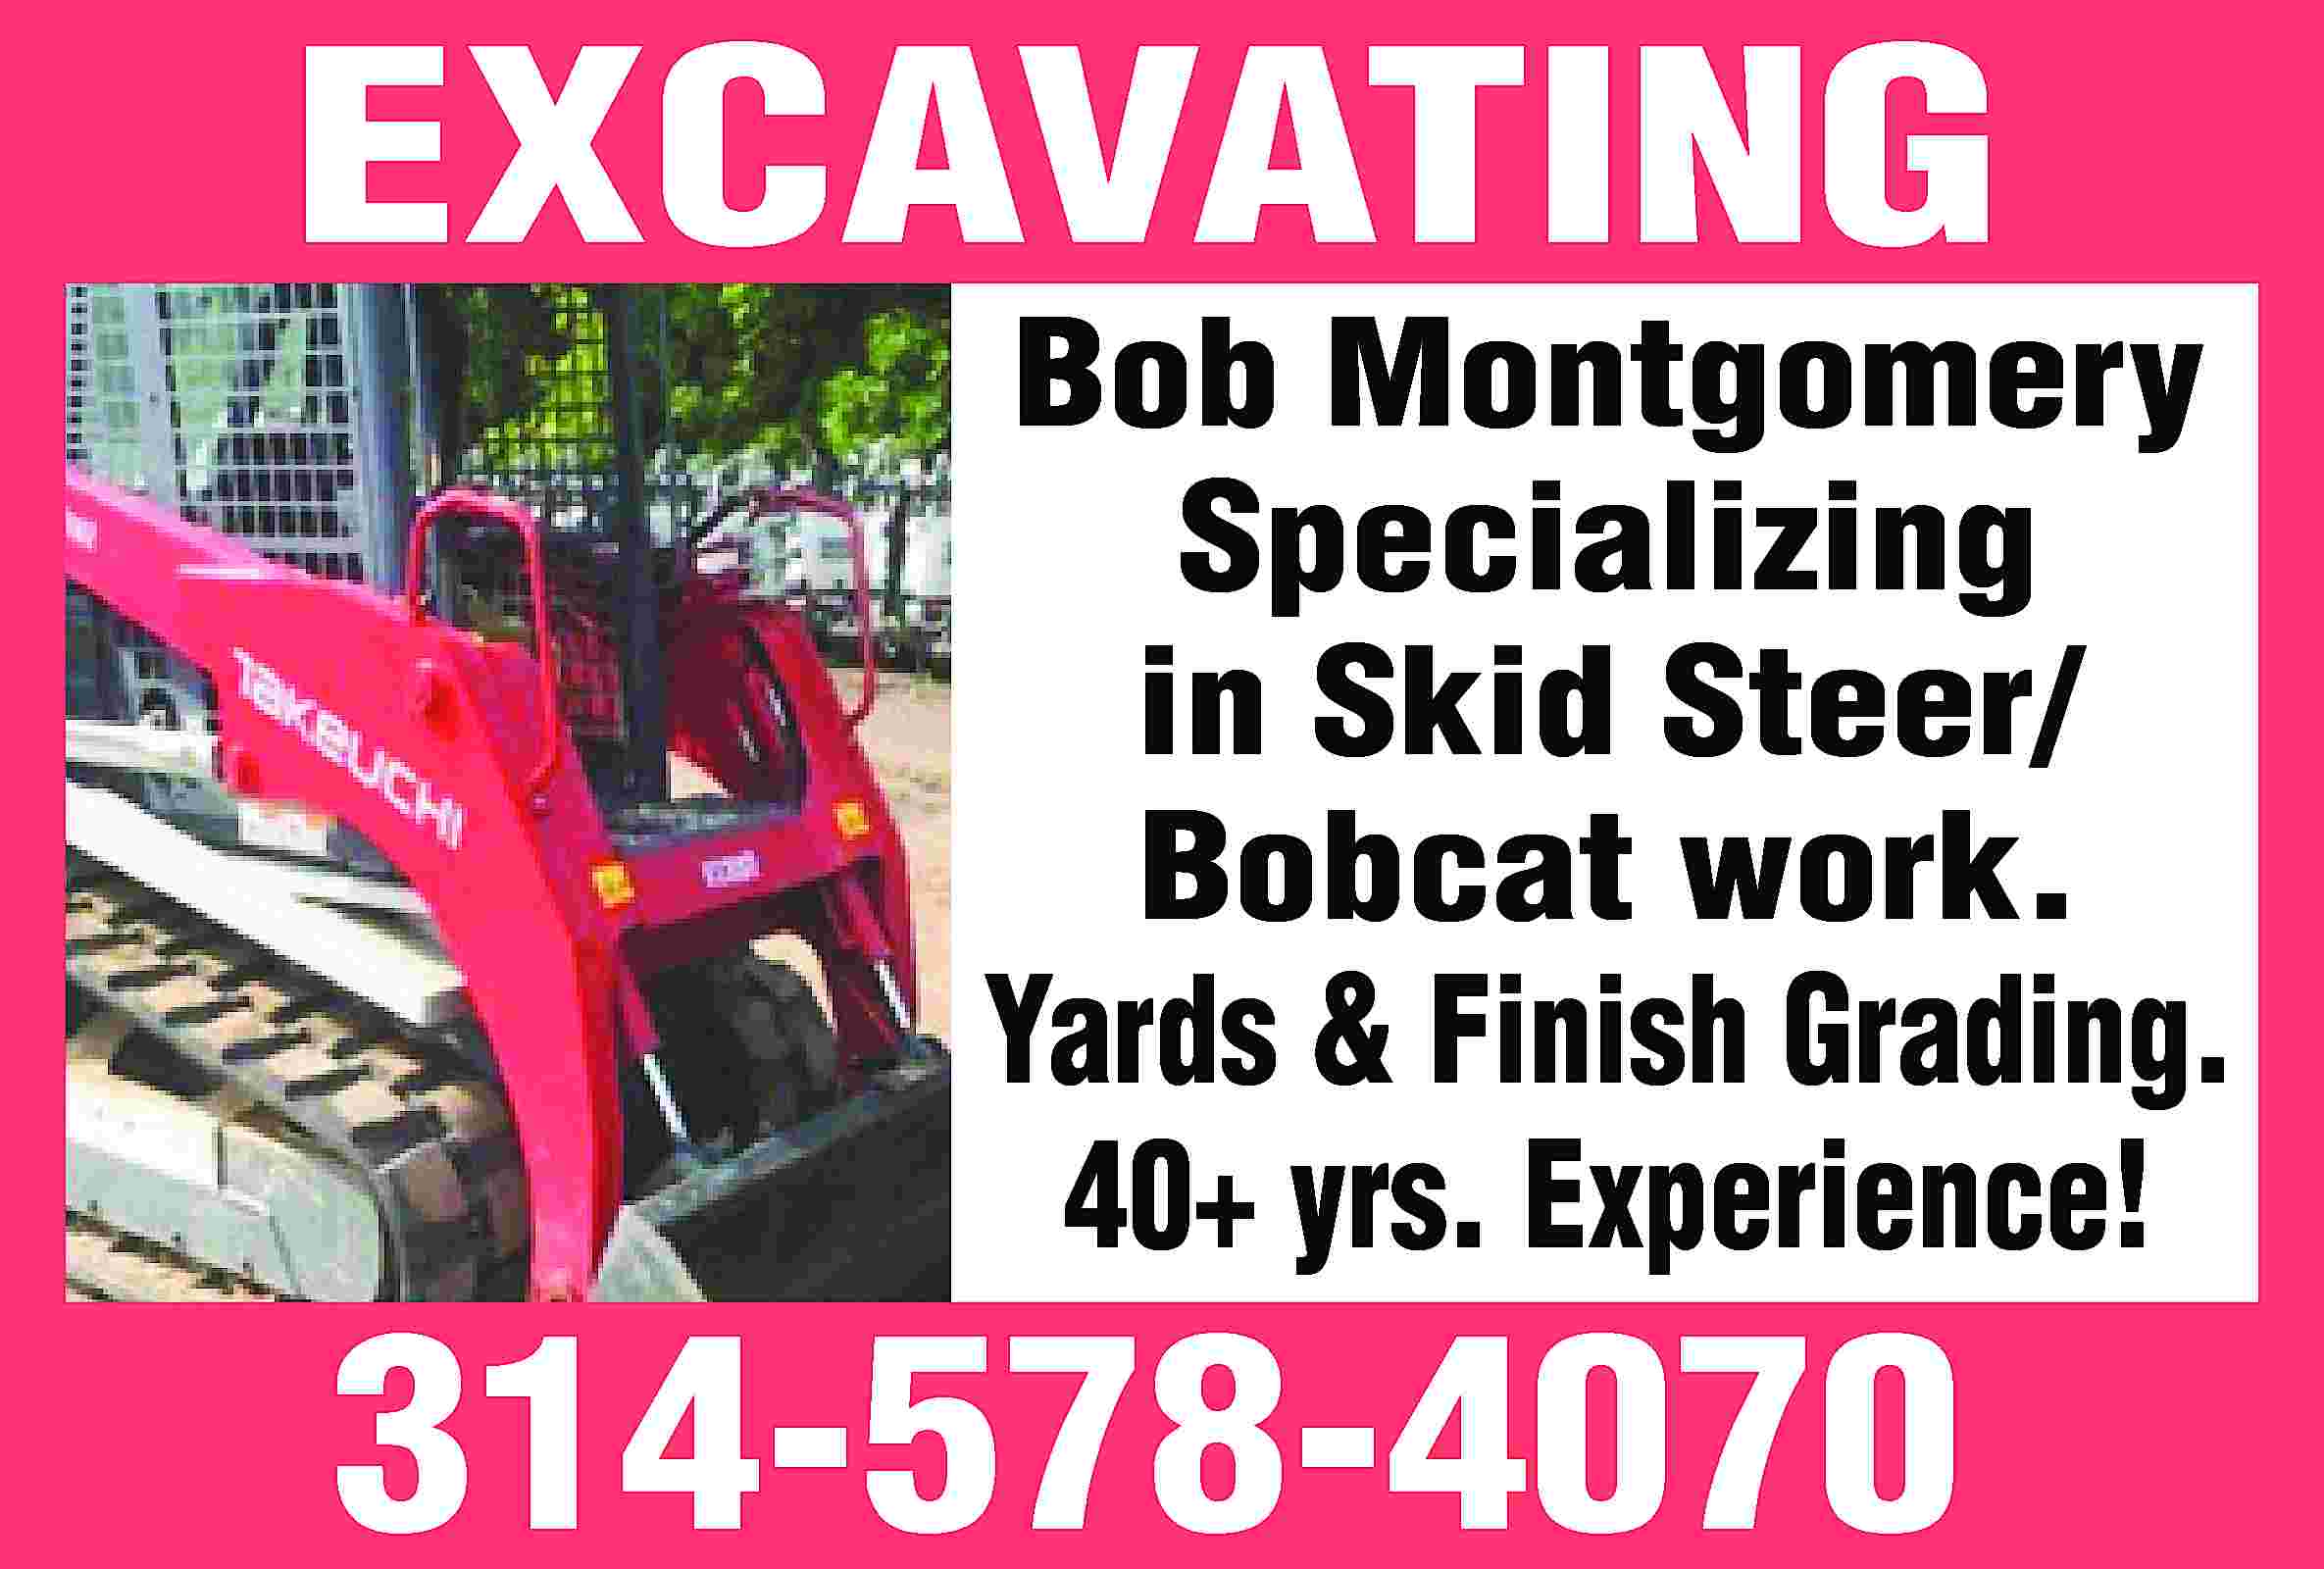 EXCAVATING Bob Montgomery Specializing in  EXCAVATING Bob Montgomery Specializing in Skid Steer/ Bobcat work. Yards & Finish Grading. 40+ yrs. Experience! 314-578-4070